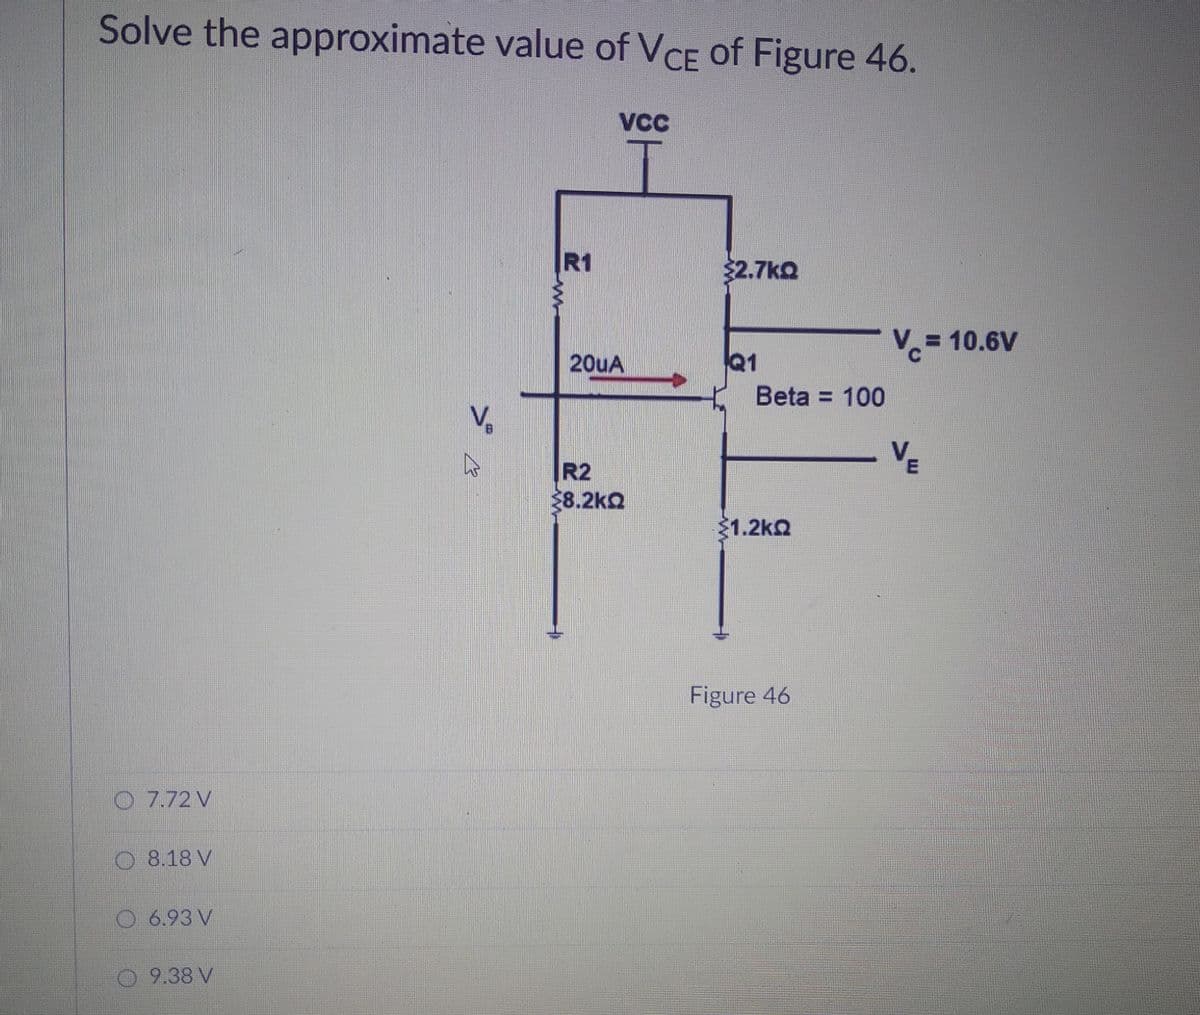 Solve the approximate value of VCE of Figure 46.
R1
2.7ko
V.= 10.6V
%3D
20uA
Q1
Beta = 100
VE
R2
8.2kQ
$1.2ka
Figure 46
O 7.72 V
8.18 V
O 6.93 V
9.38 V
